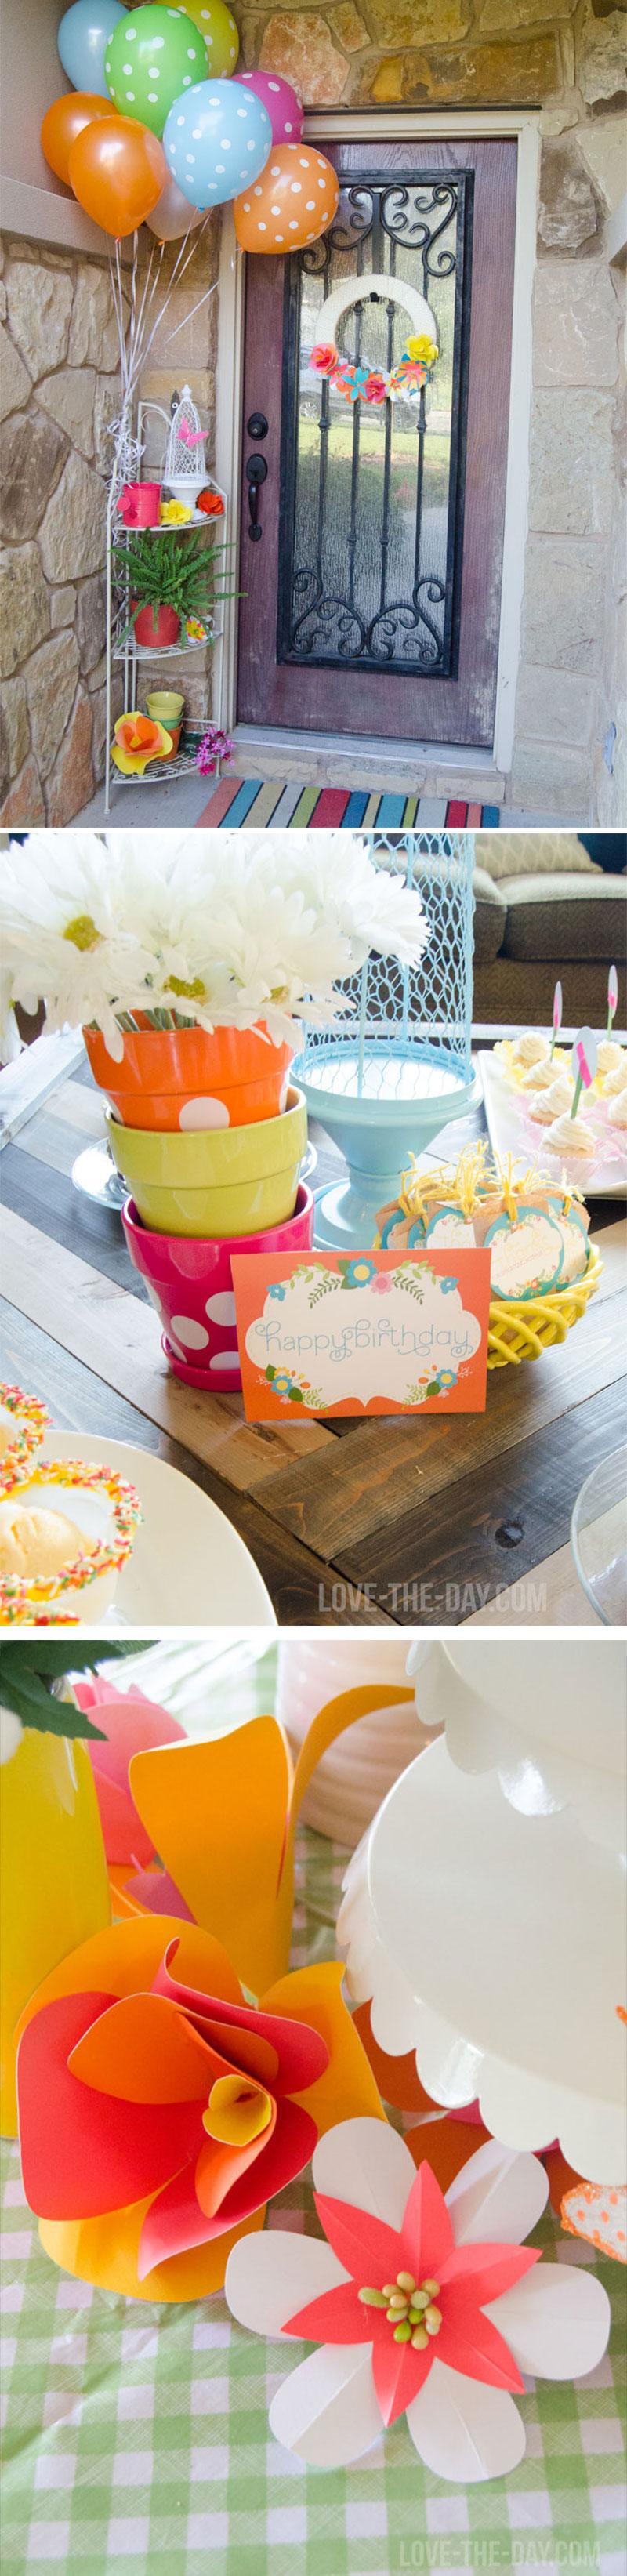 Garden Party Ideas by Lindi Haws of Love The Day